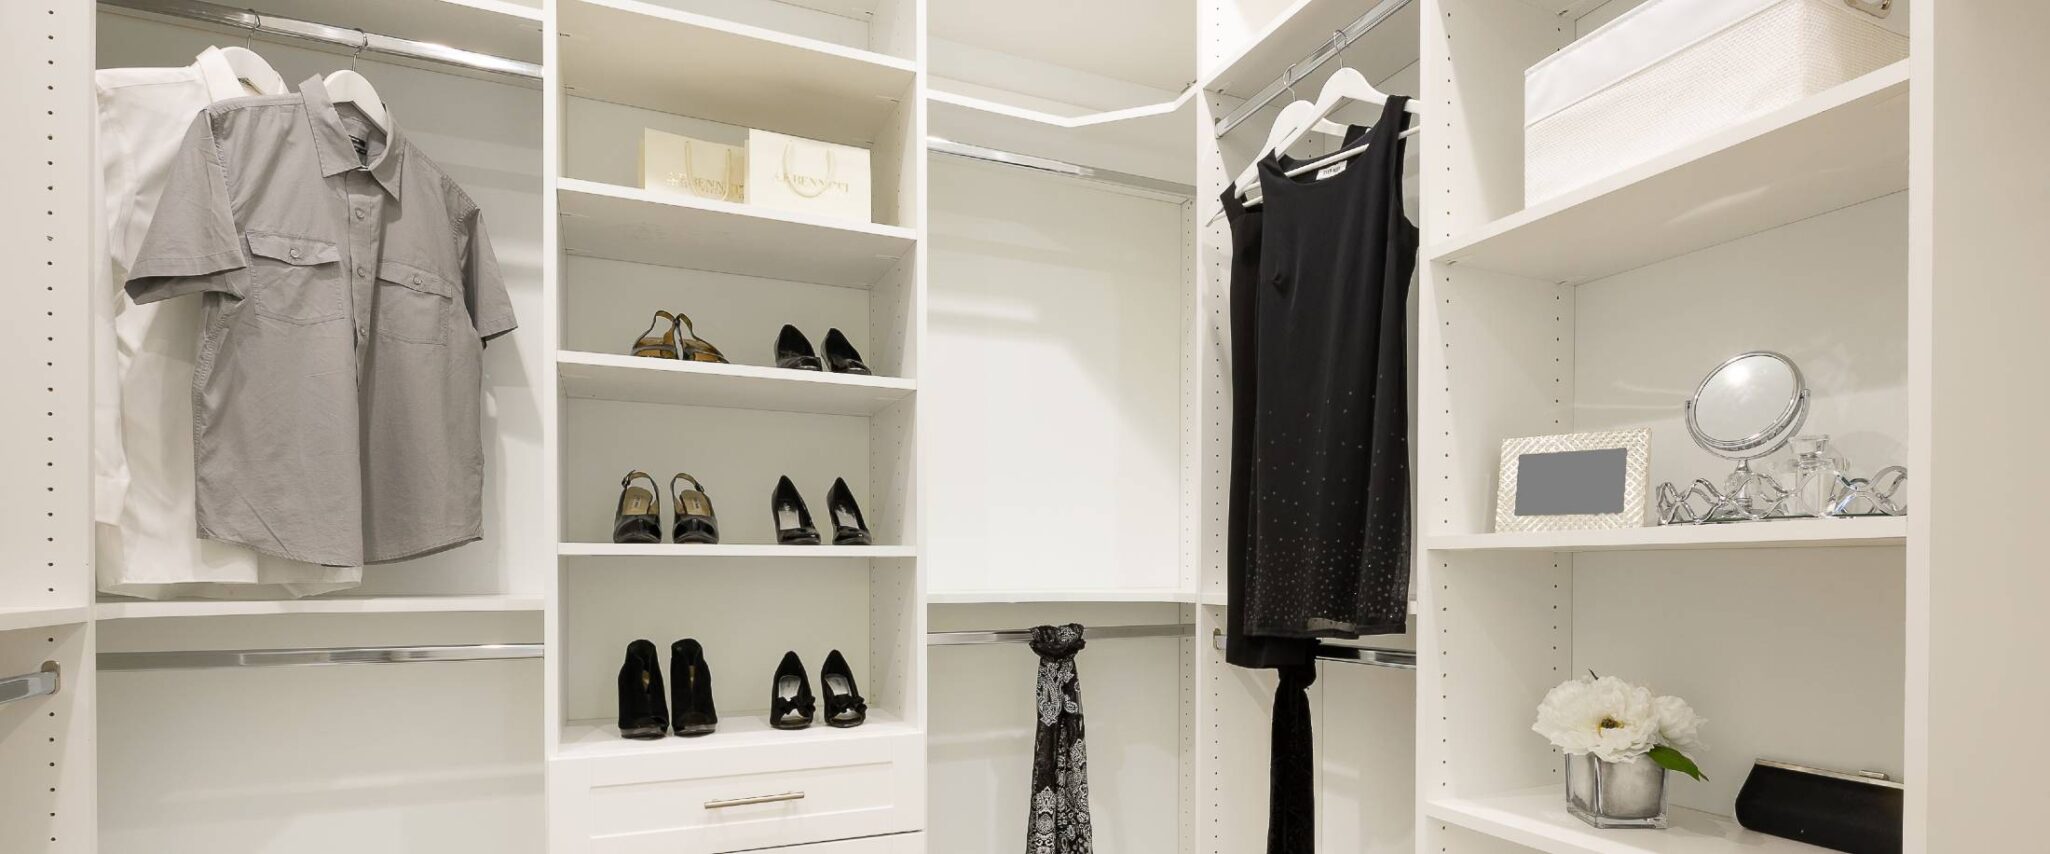 Doodt vrije tijd Samengroeiing How to Organize Your Walk-in Closets - Lake Port Square